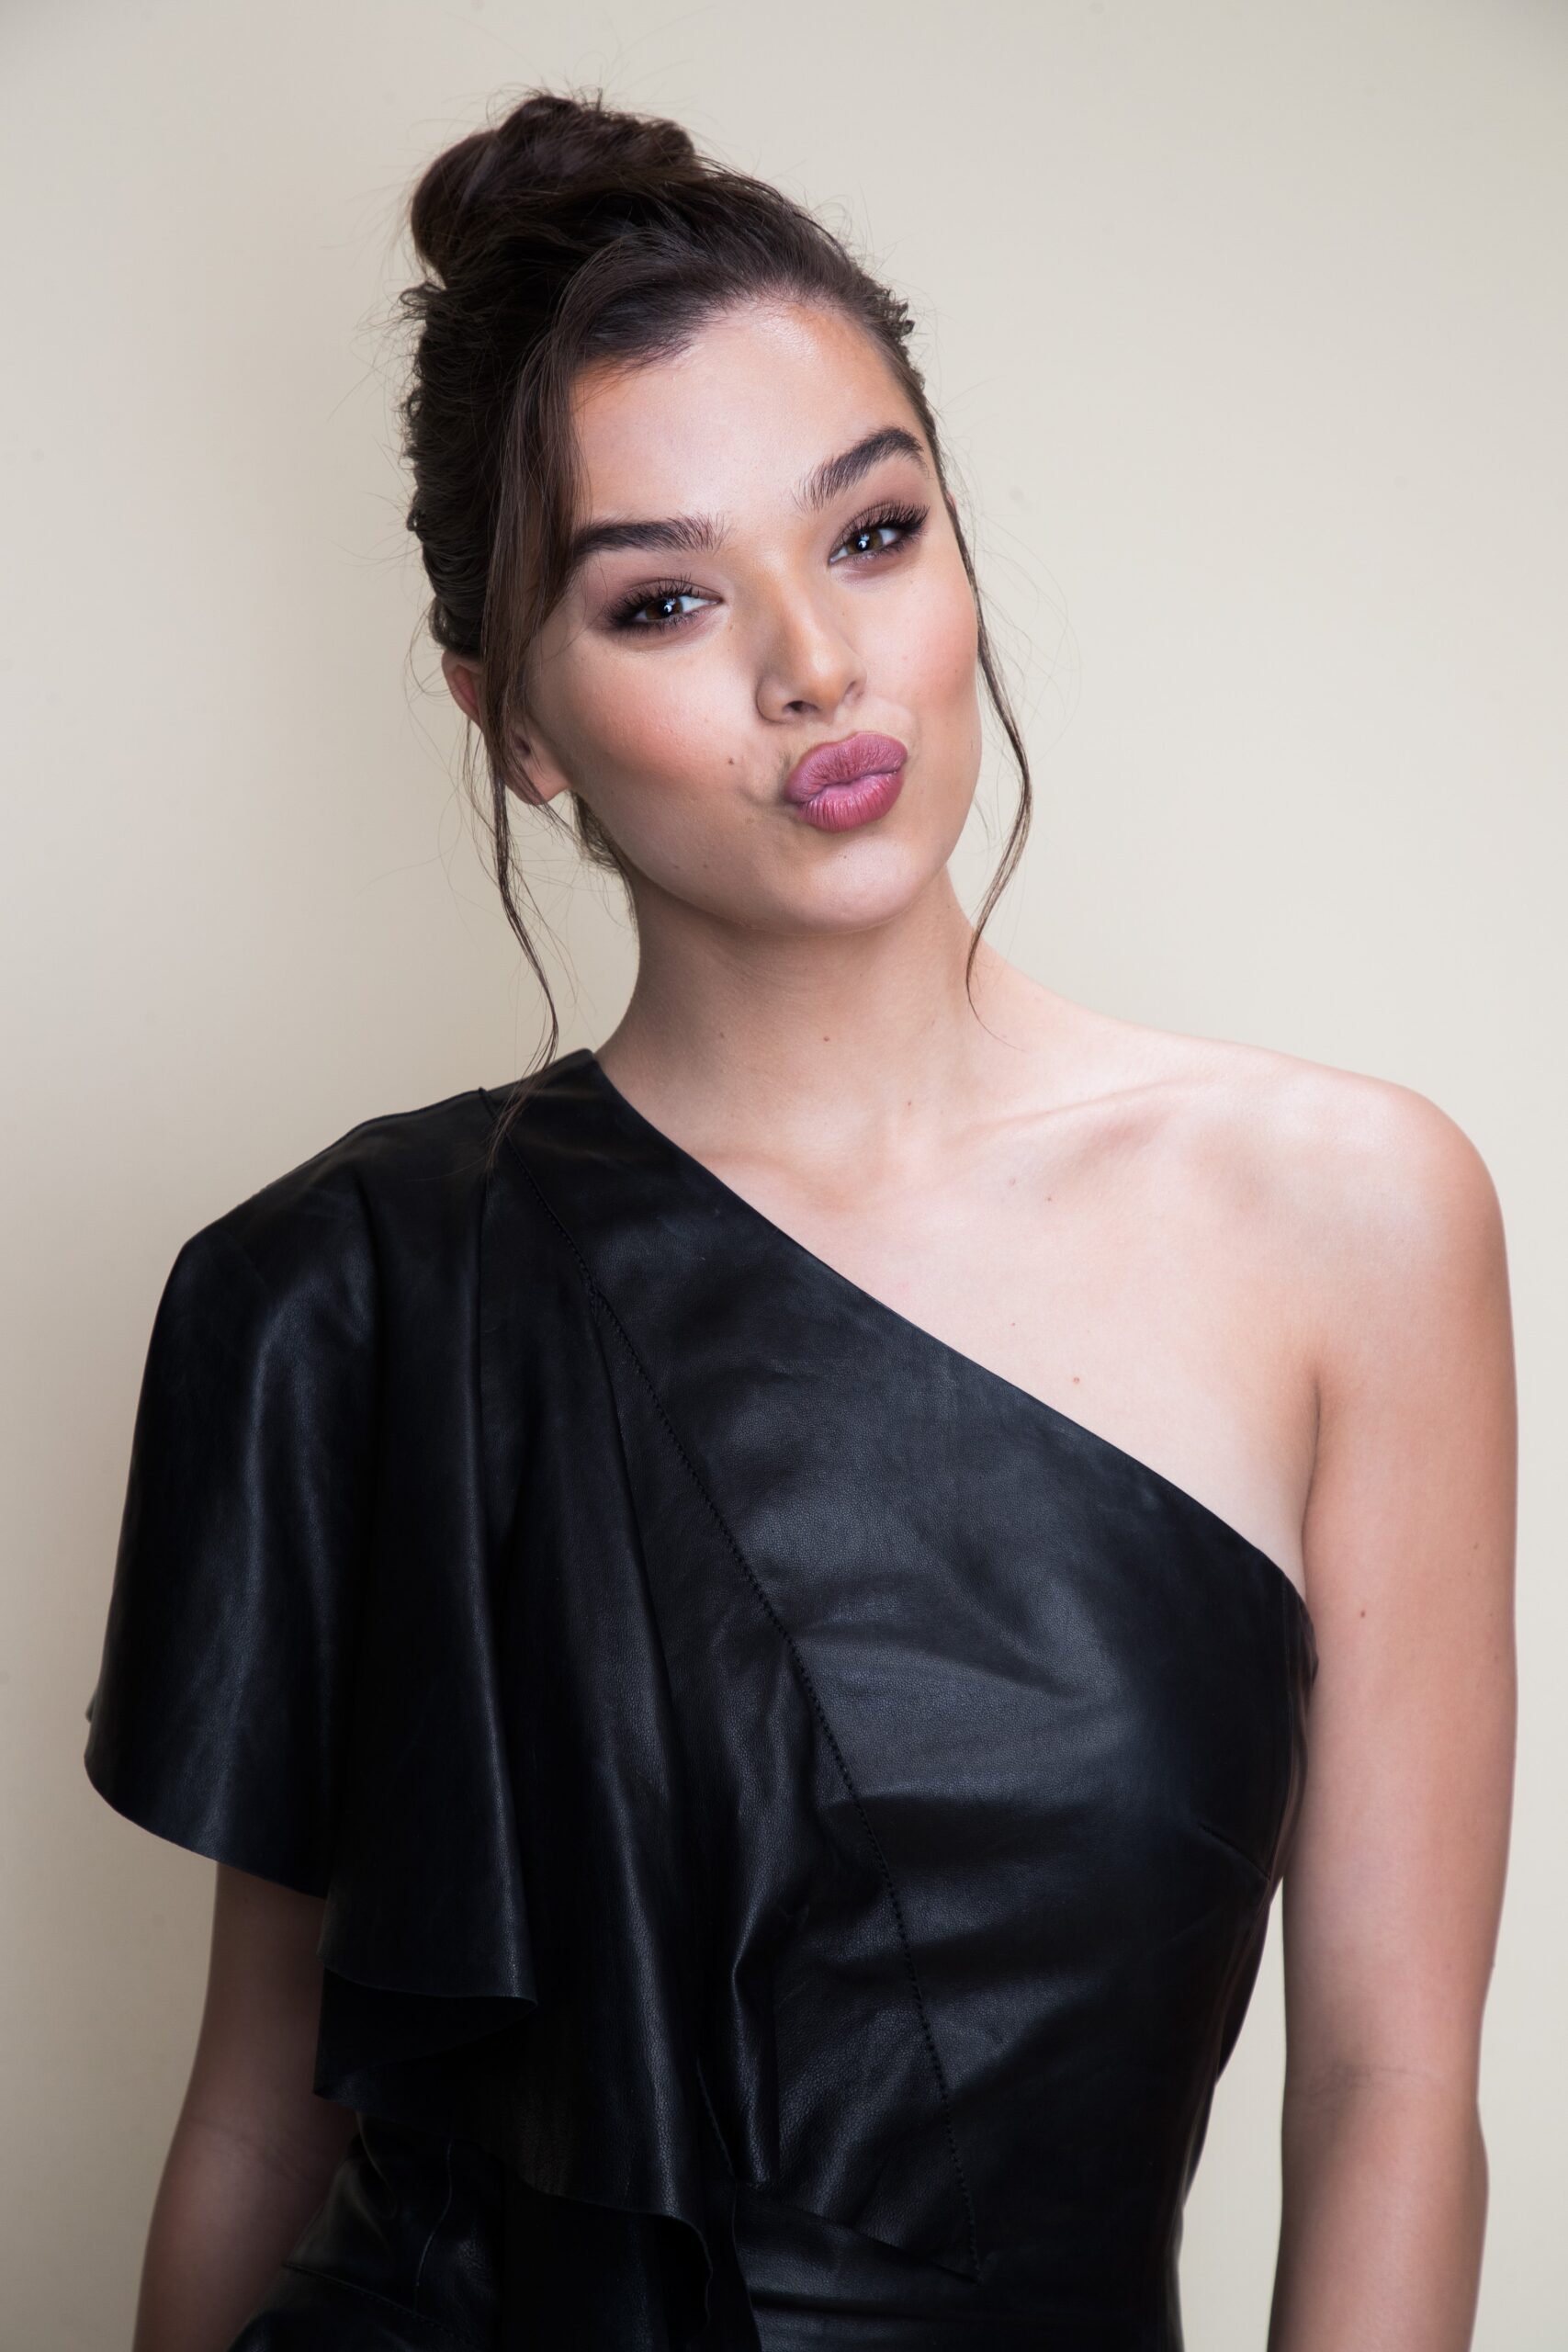 Hailee Steinfeld needs her face covered in cum